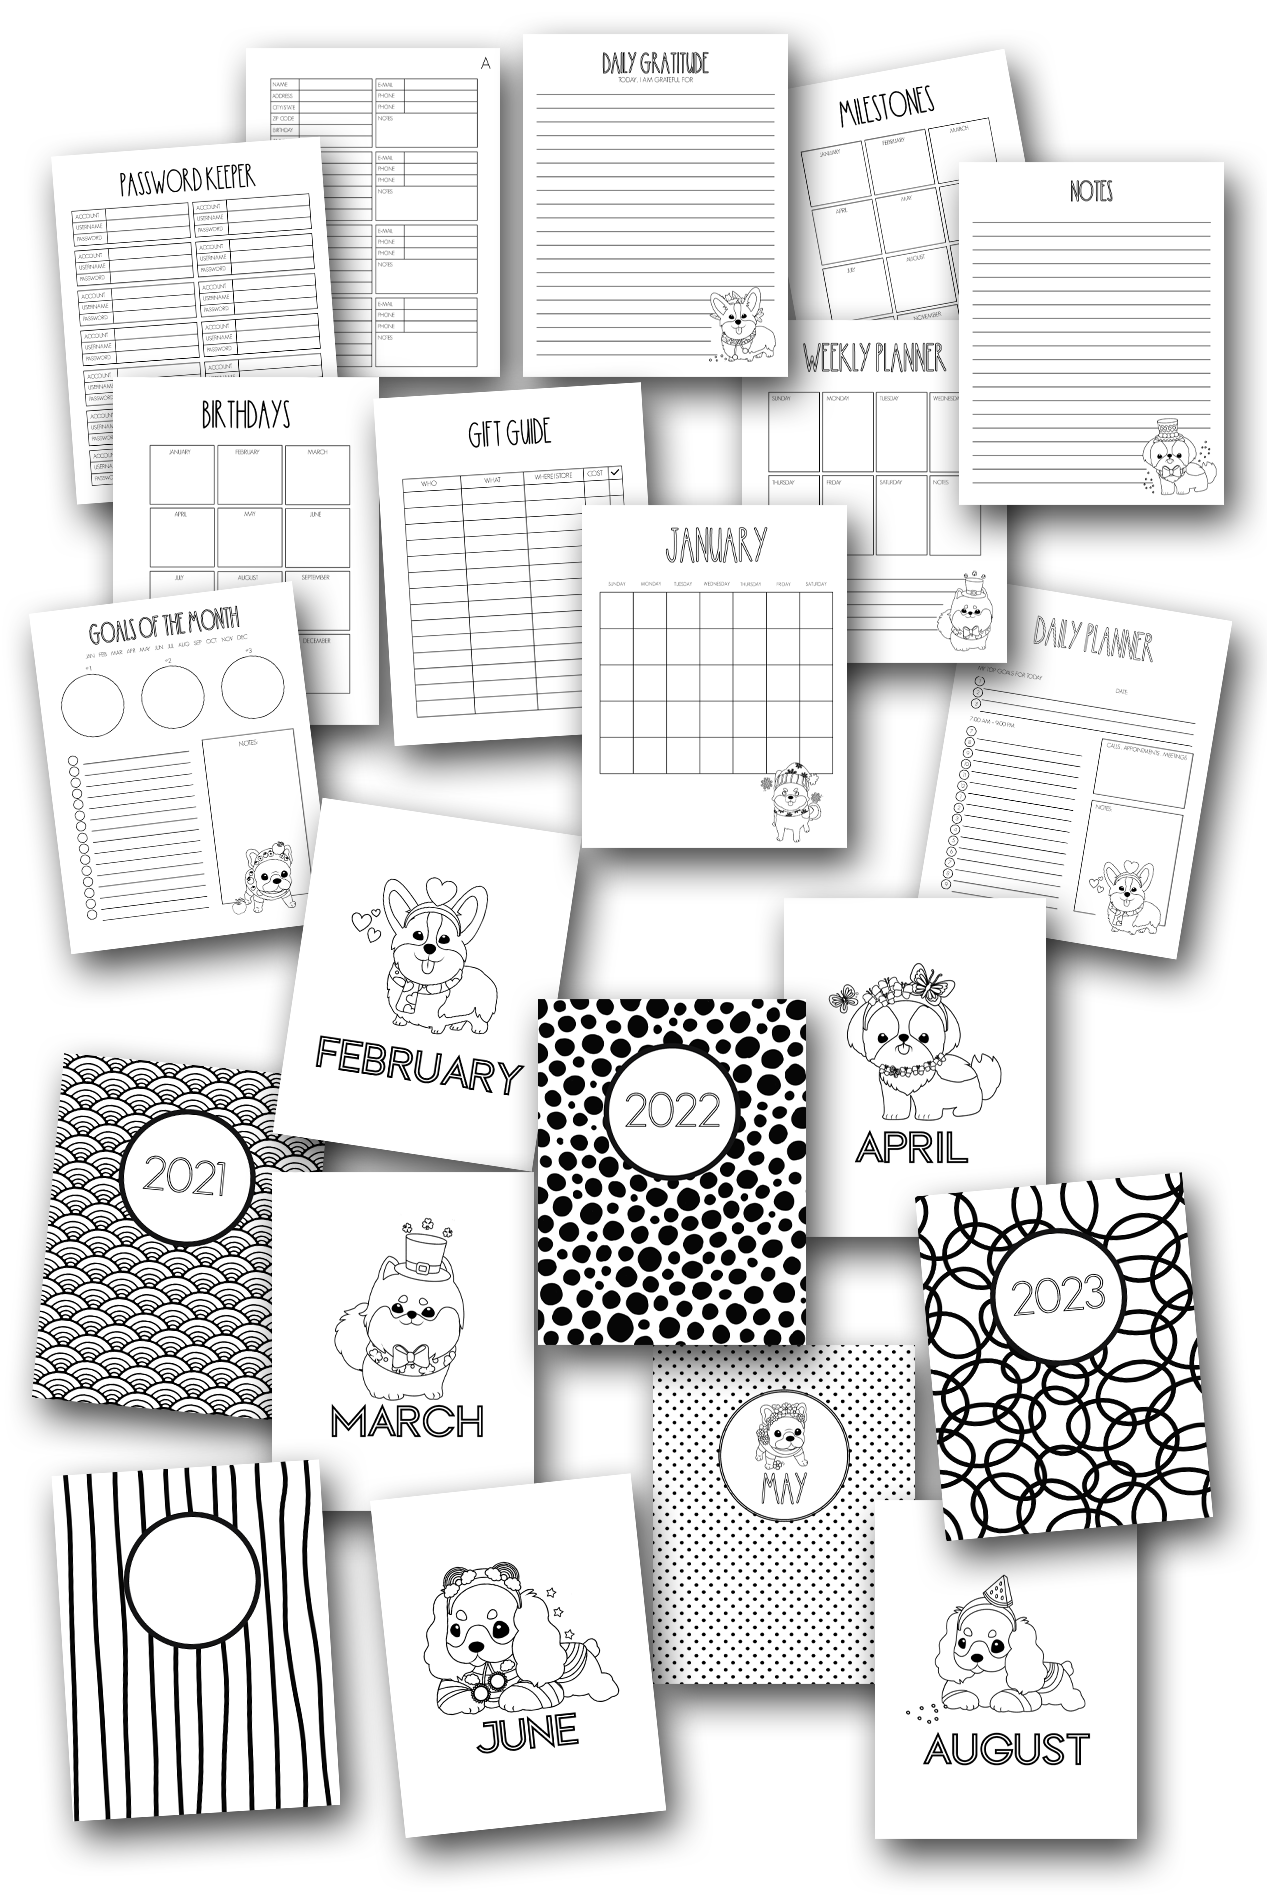 Year of the Puppy Home Organization Planner Journal